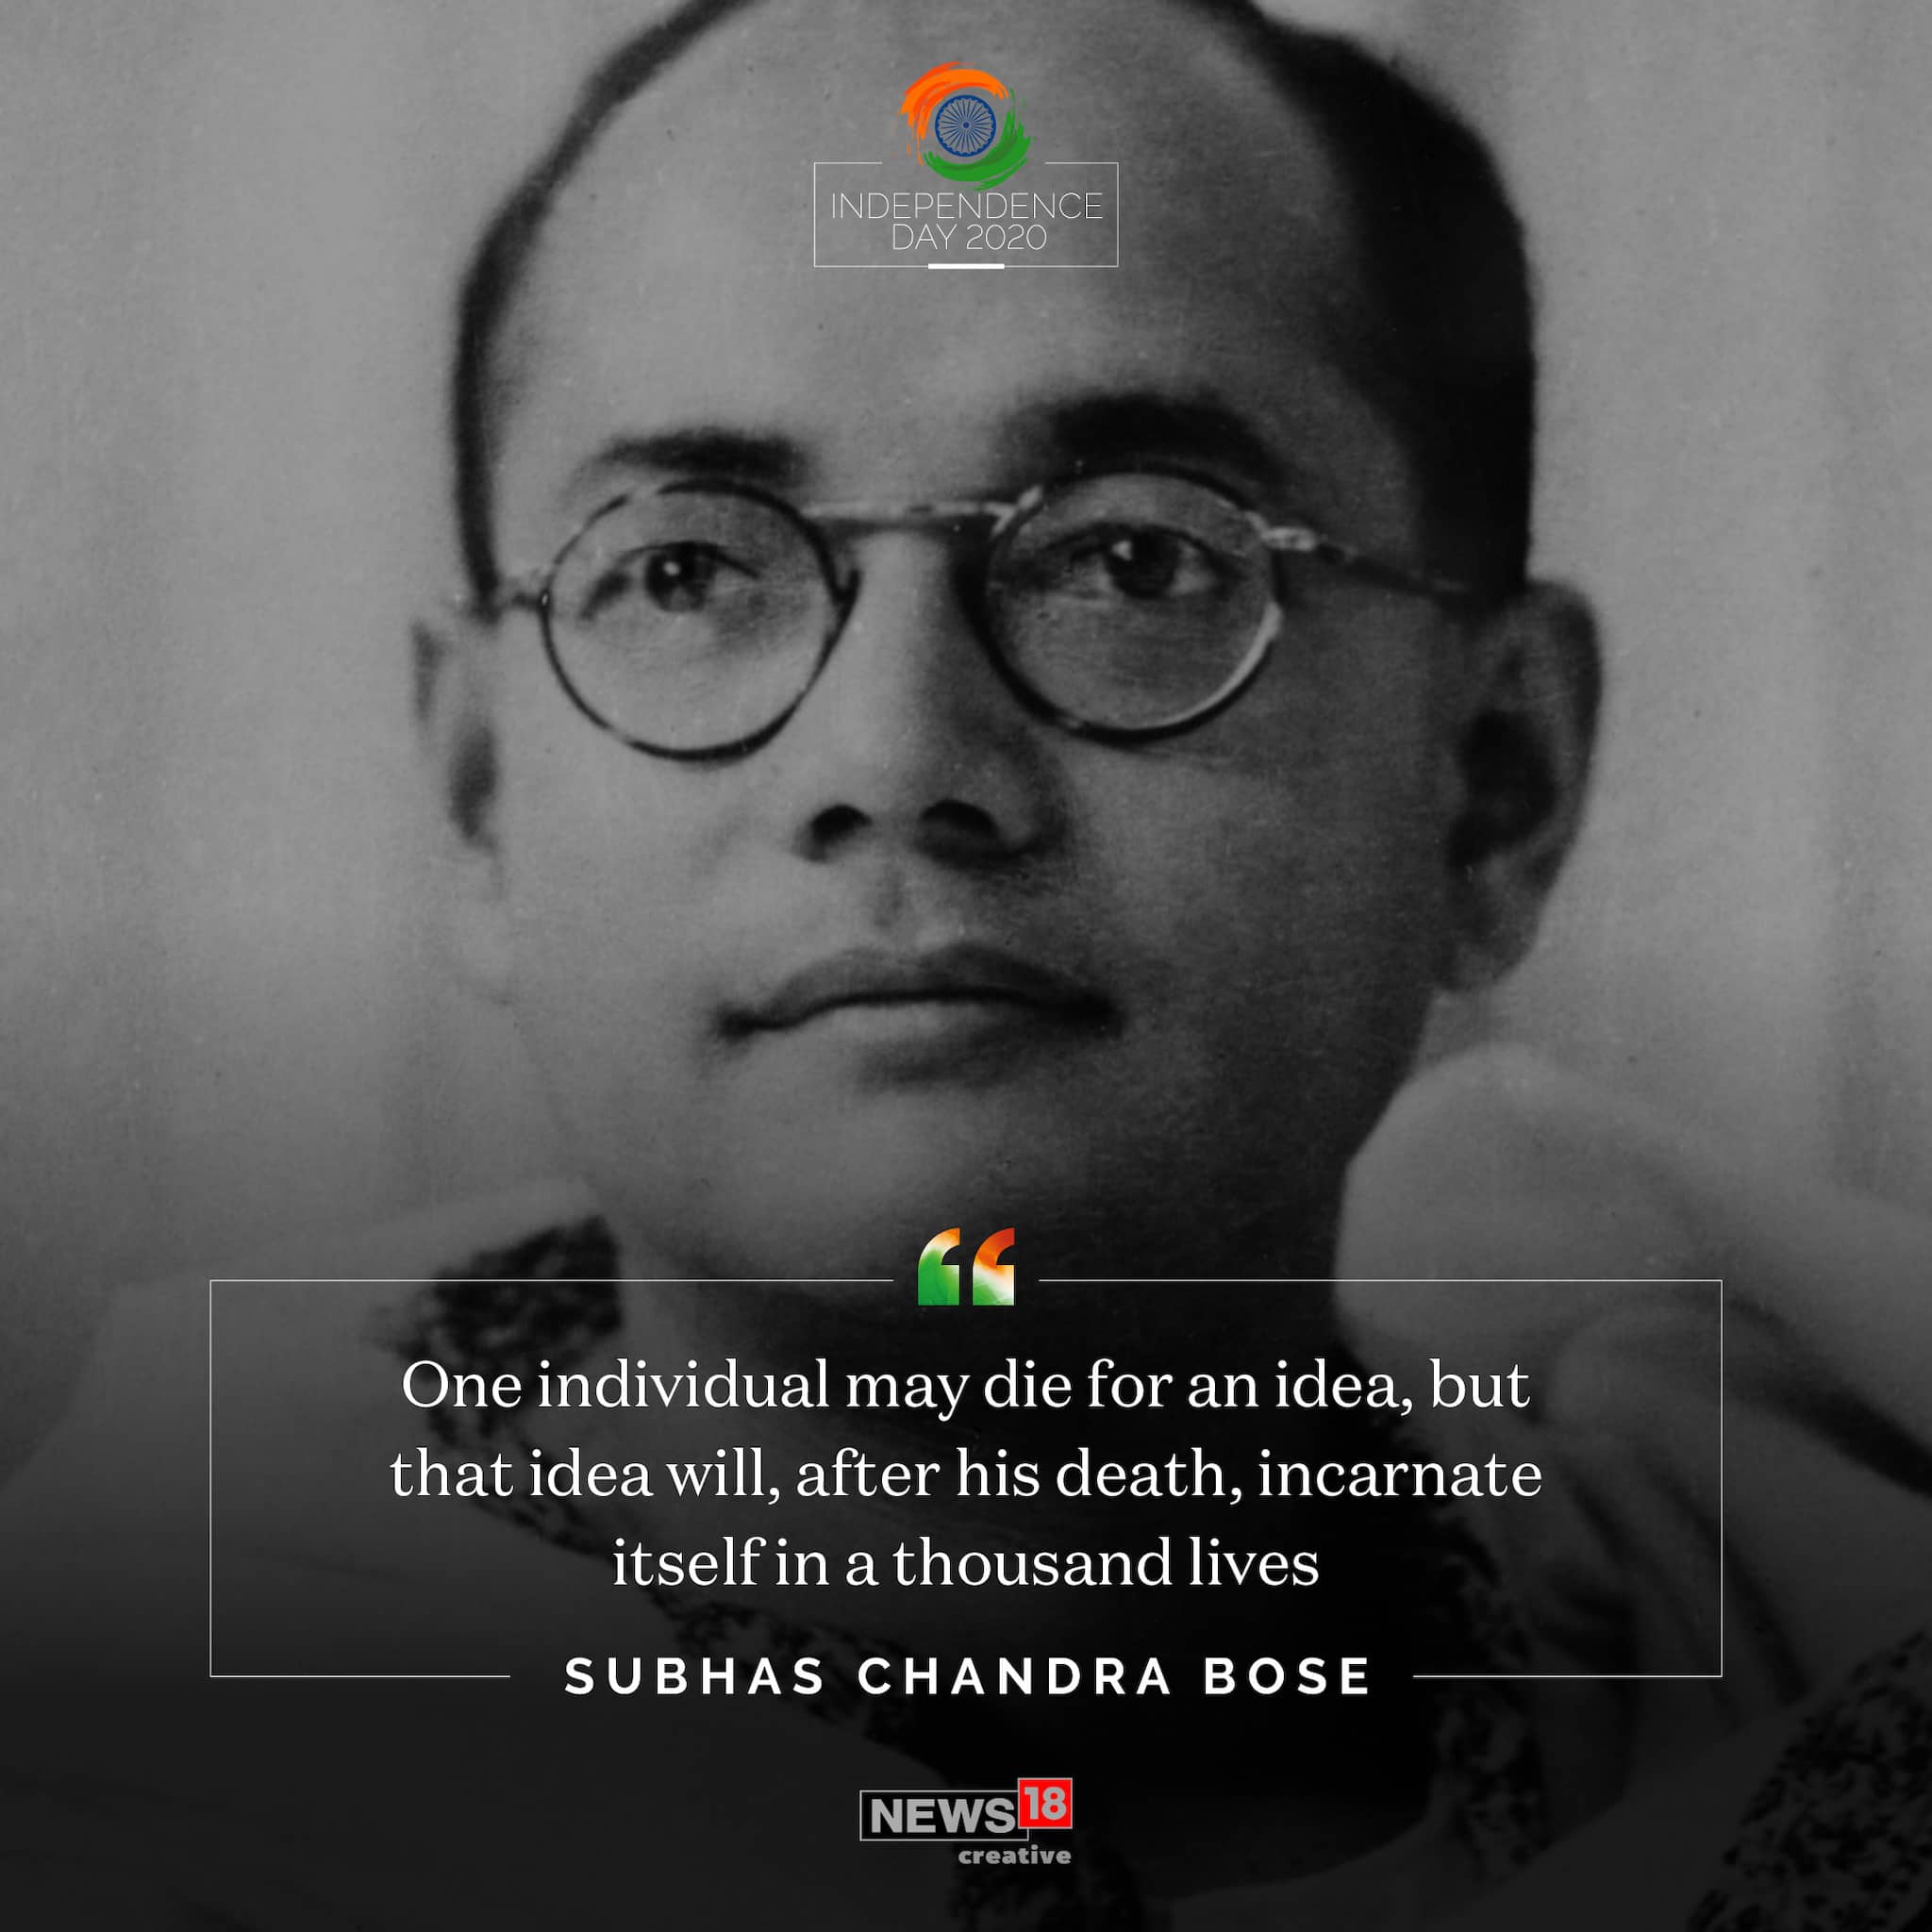 'One individual may die for an idea, but that idea will, after is death, incarnate itself in a thousand lives' quote by Netaji Subhas Chandra Bose.